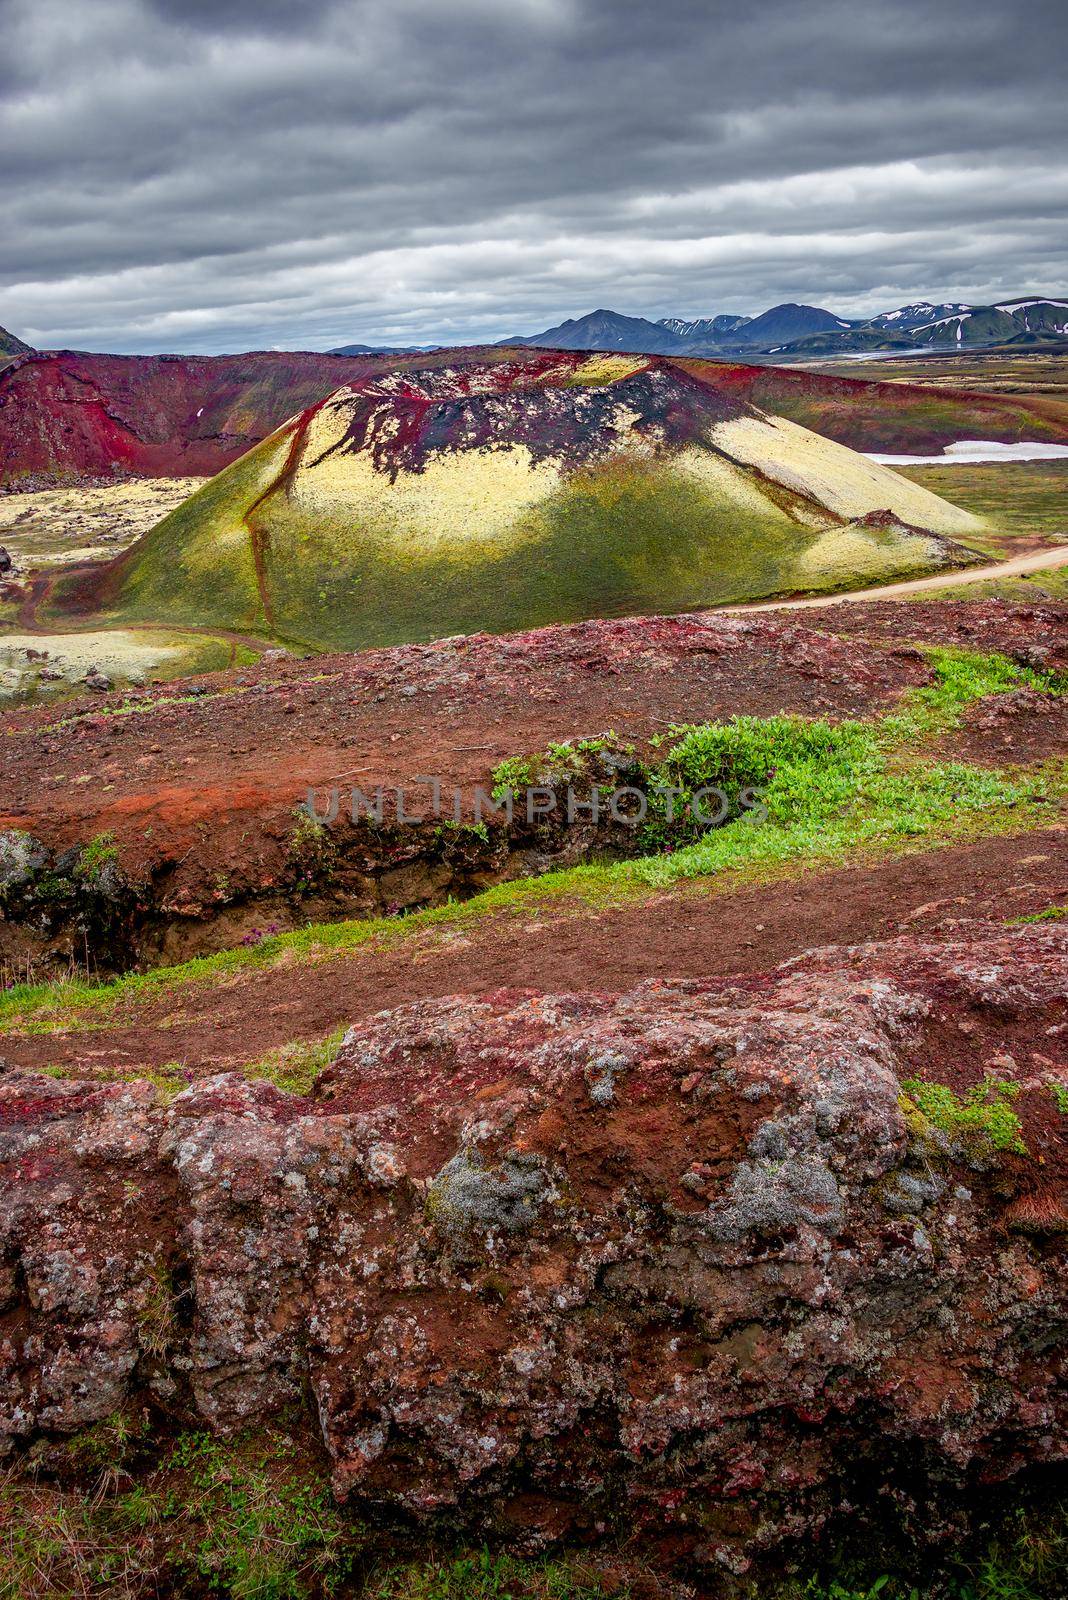 Surreal magic Icelandic landscape of colorful rainbow volcanic Landmannalaugar mountains, red and pink volcanic crater Stutur at famous Laugavegur hiking trail with dramatic sky, Iceland. by neurobite